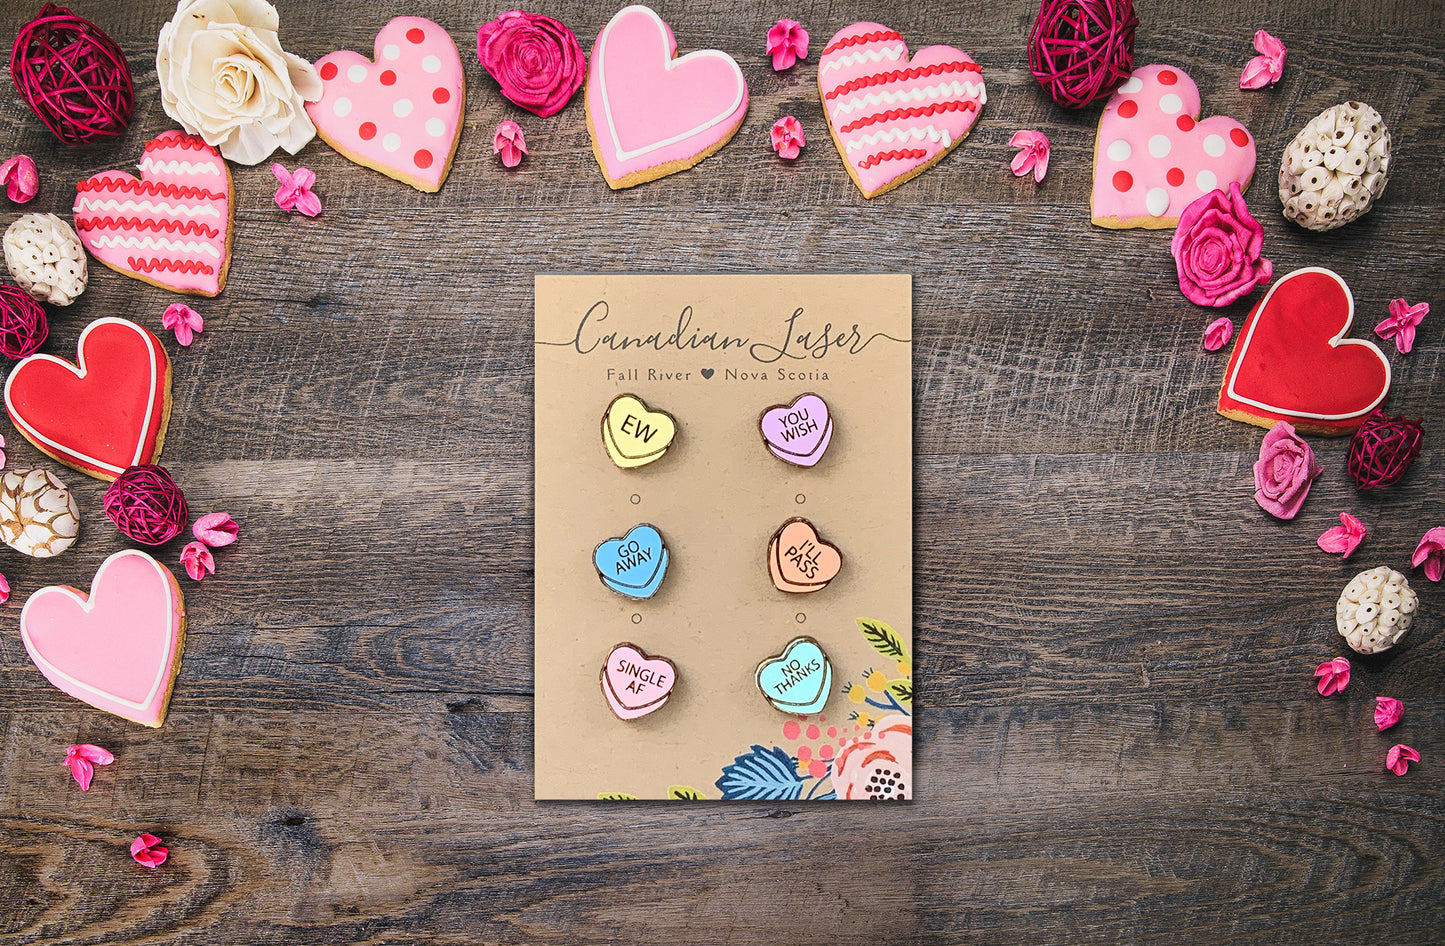 Hand Painted Wooden Studs - Holiday - Valentine's Day - Anti-Valentines Day Conversation Hearts